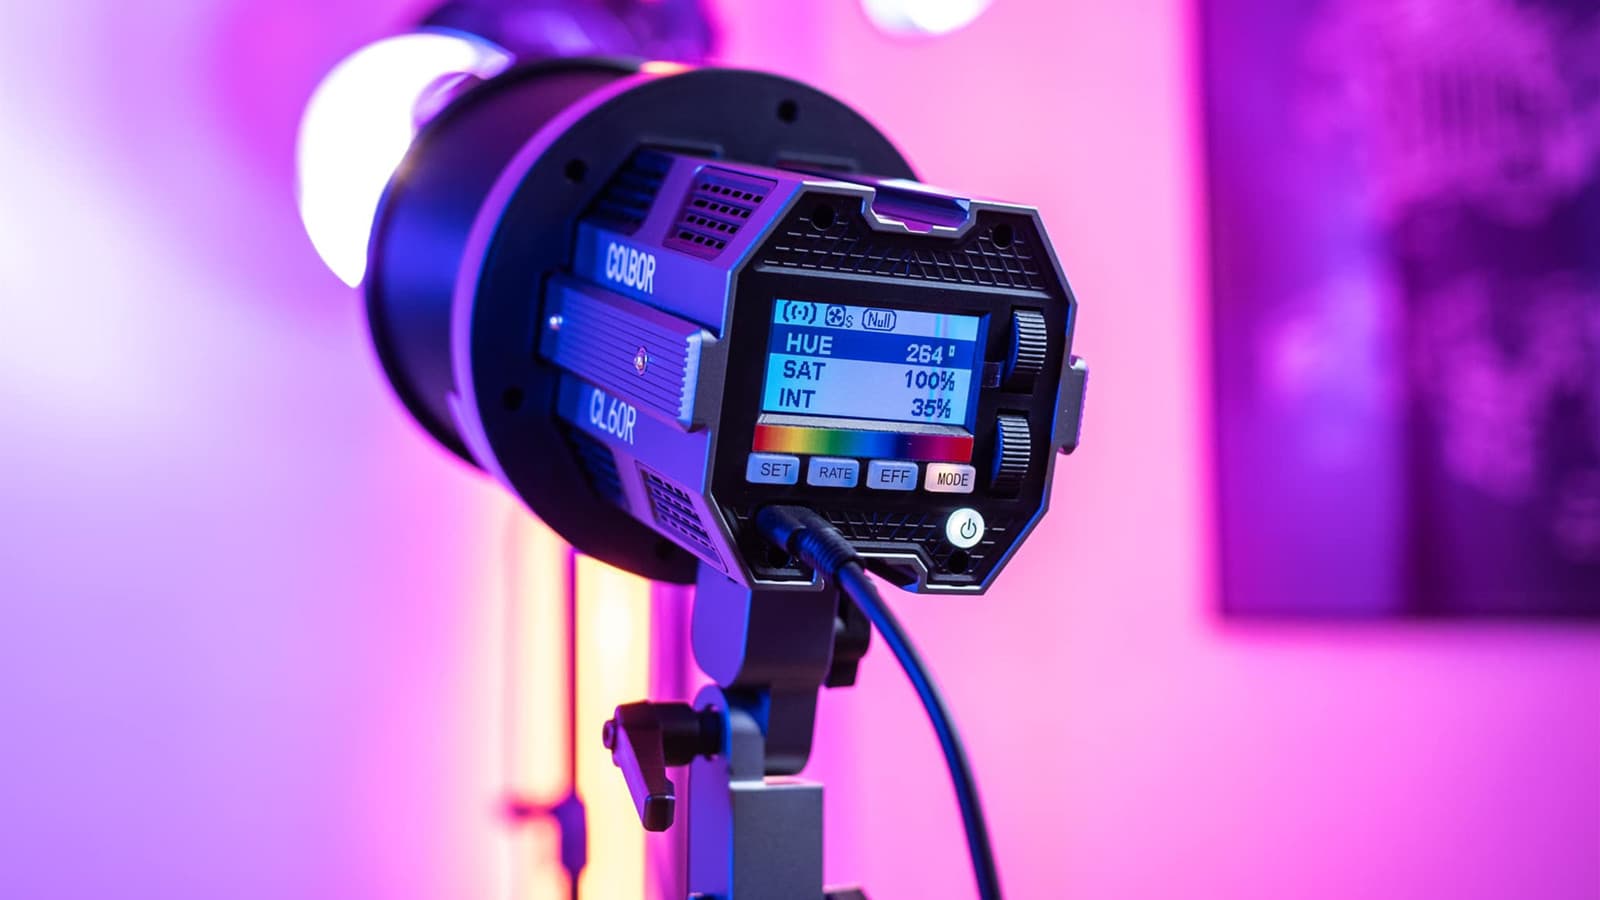 COLBOR CL60R can offer background lighting for YouTube videos in various colors.